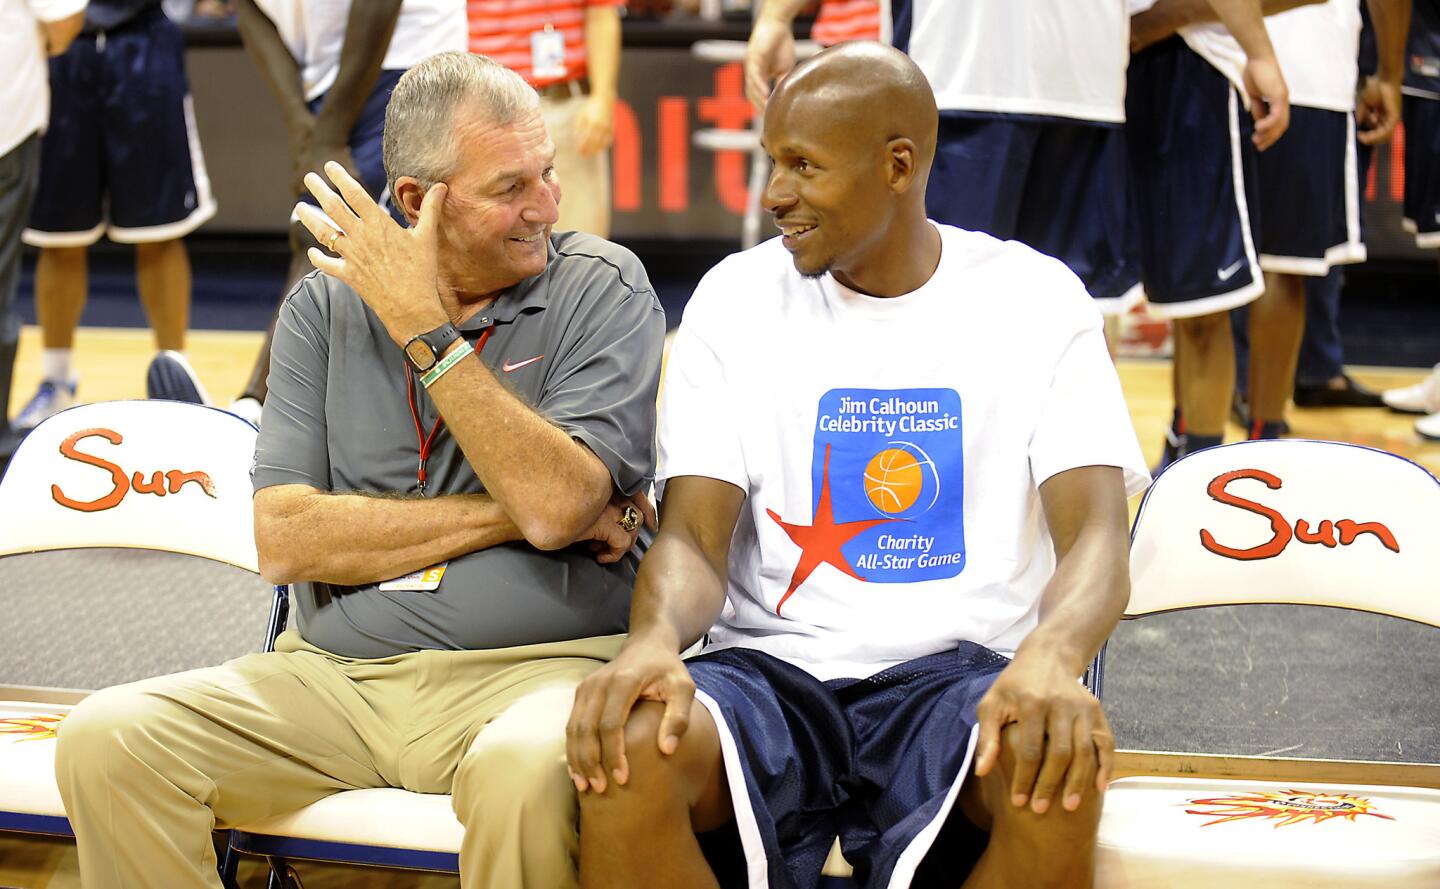 Jim Calhoun and Ray Allen spend a few moments together after a group photo before Calhoun's Celebrity Classic basketball game at the Mohegan Sun Arena Friday night in Uncasville.